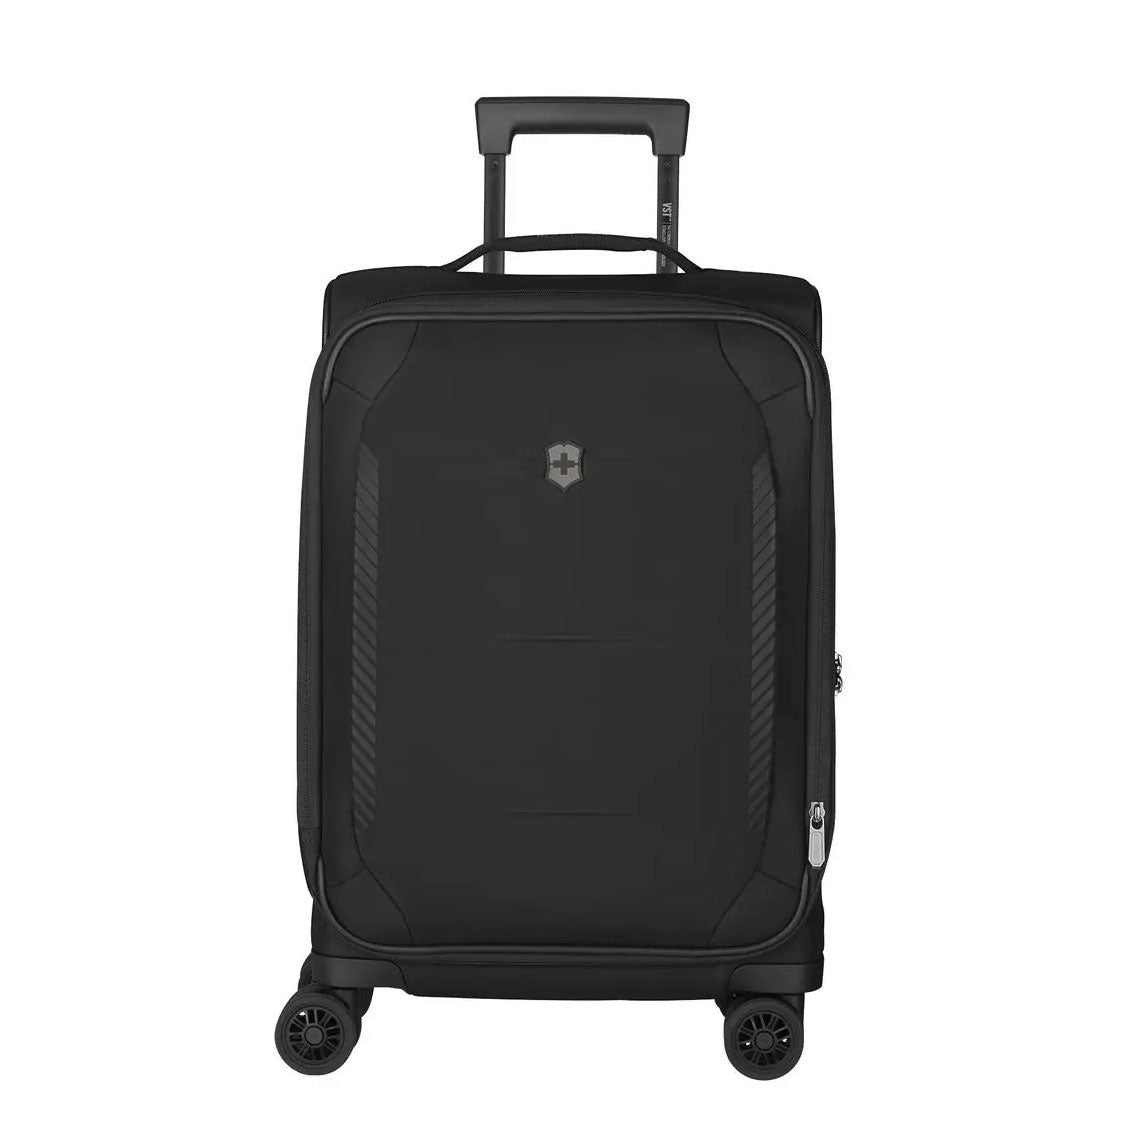 Victorinox Swiss Army Crosslight Frequent Flyer Plus Softside Carry-On